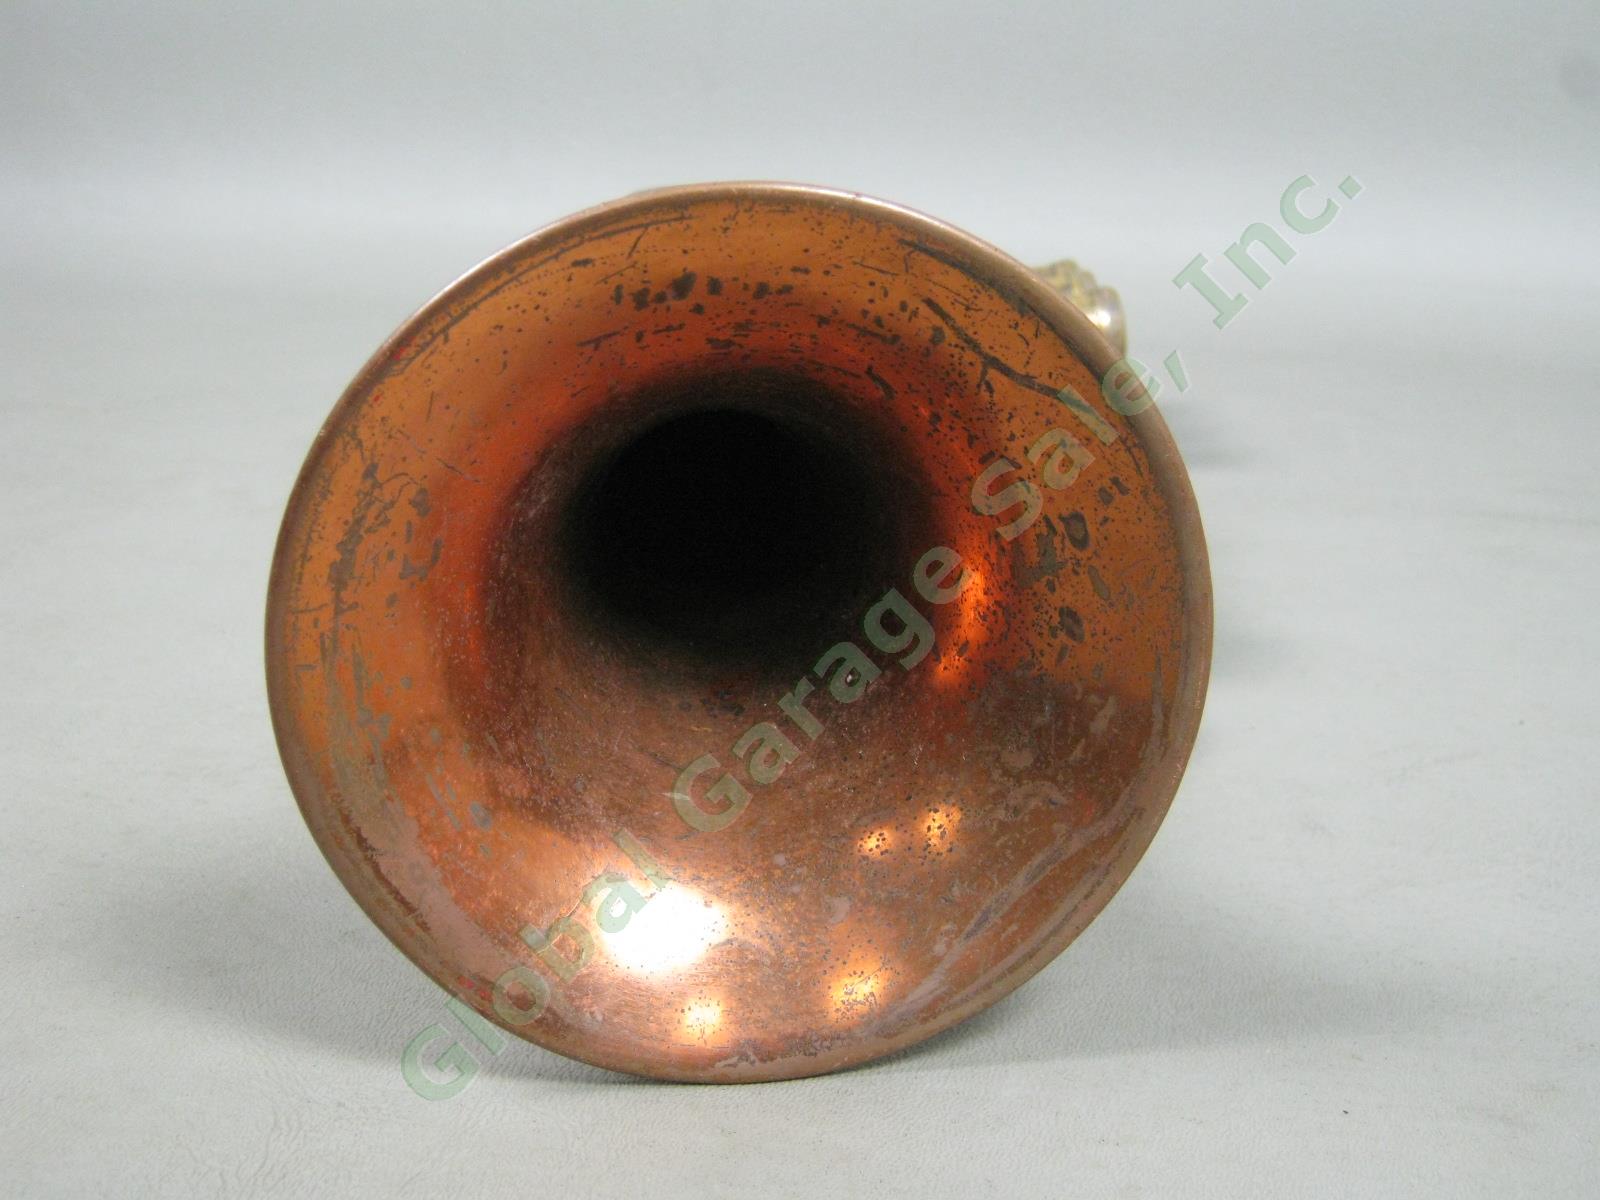 Vintage 1950s 1952 CG C G Conn Copper Bell Trumpet Serial Number 408748 No Res! 8